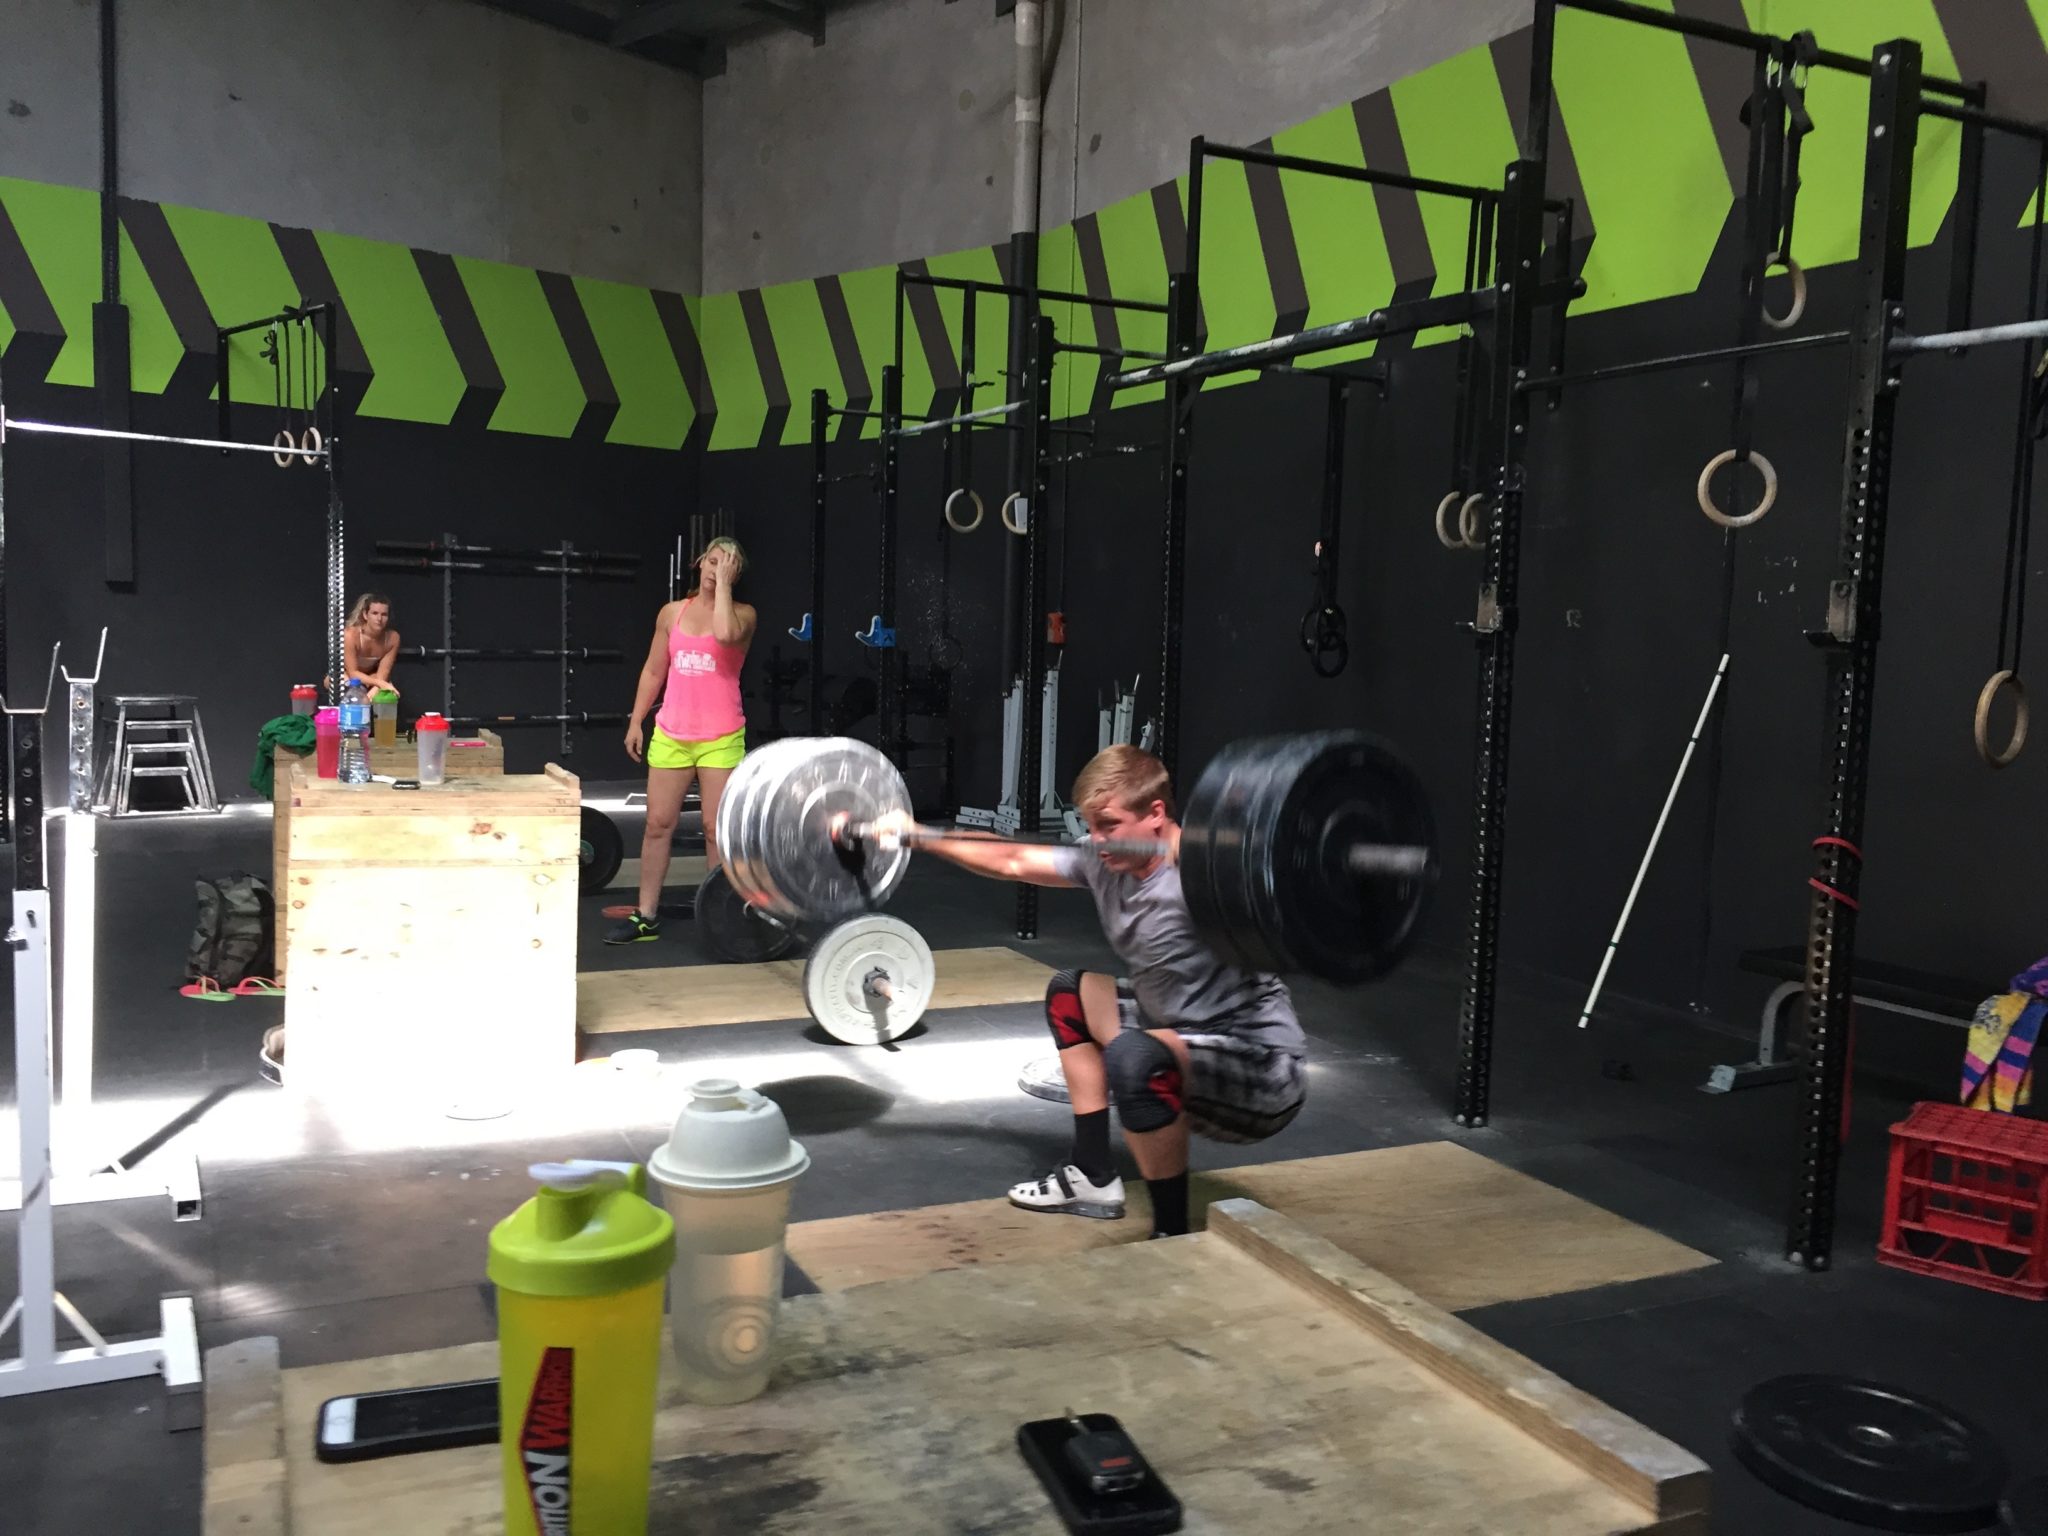 Missing Lifts in Training – What to do when it happens